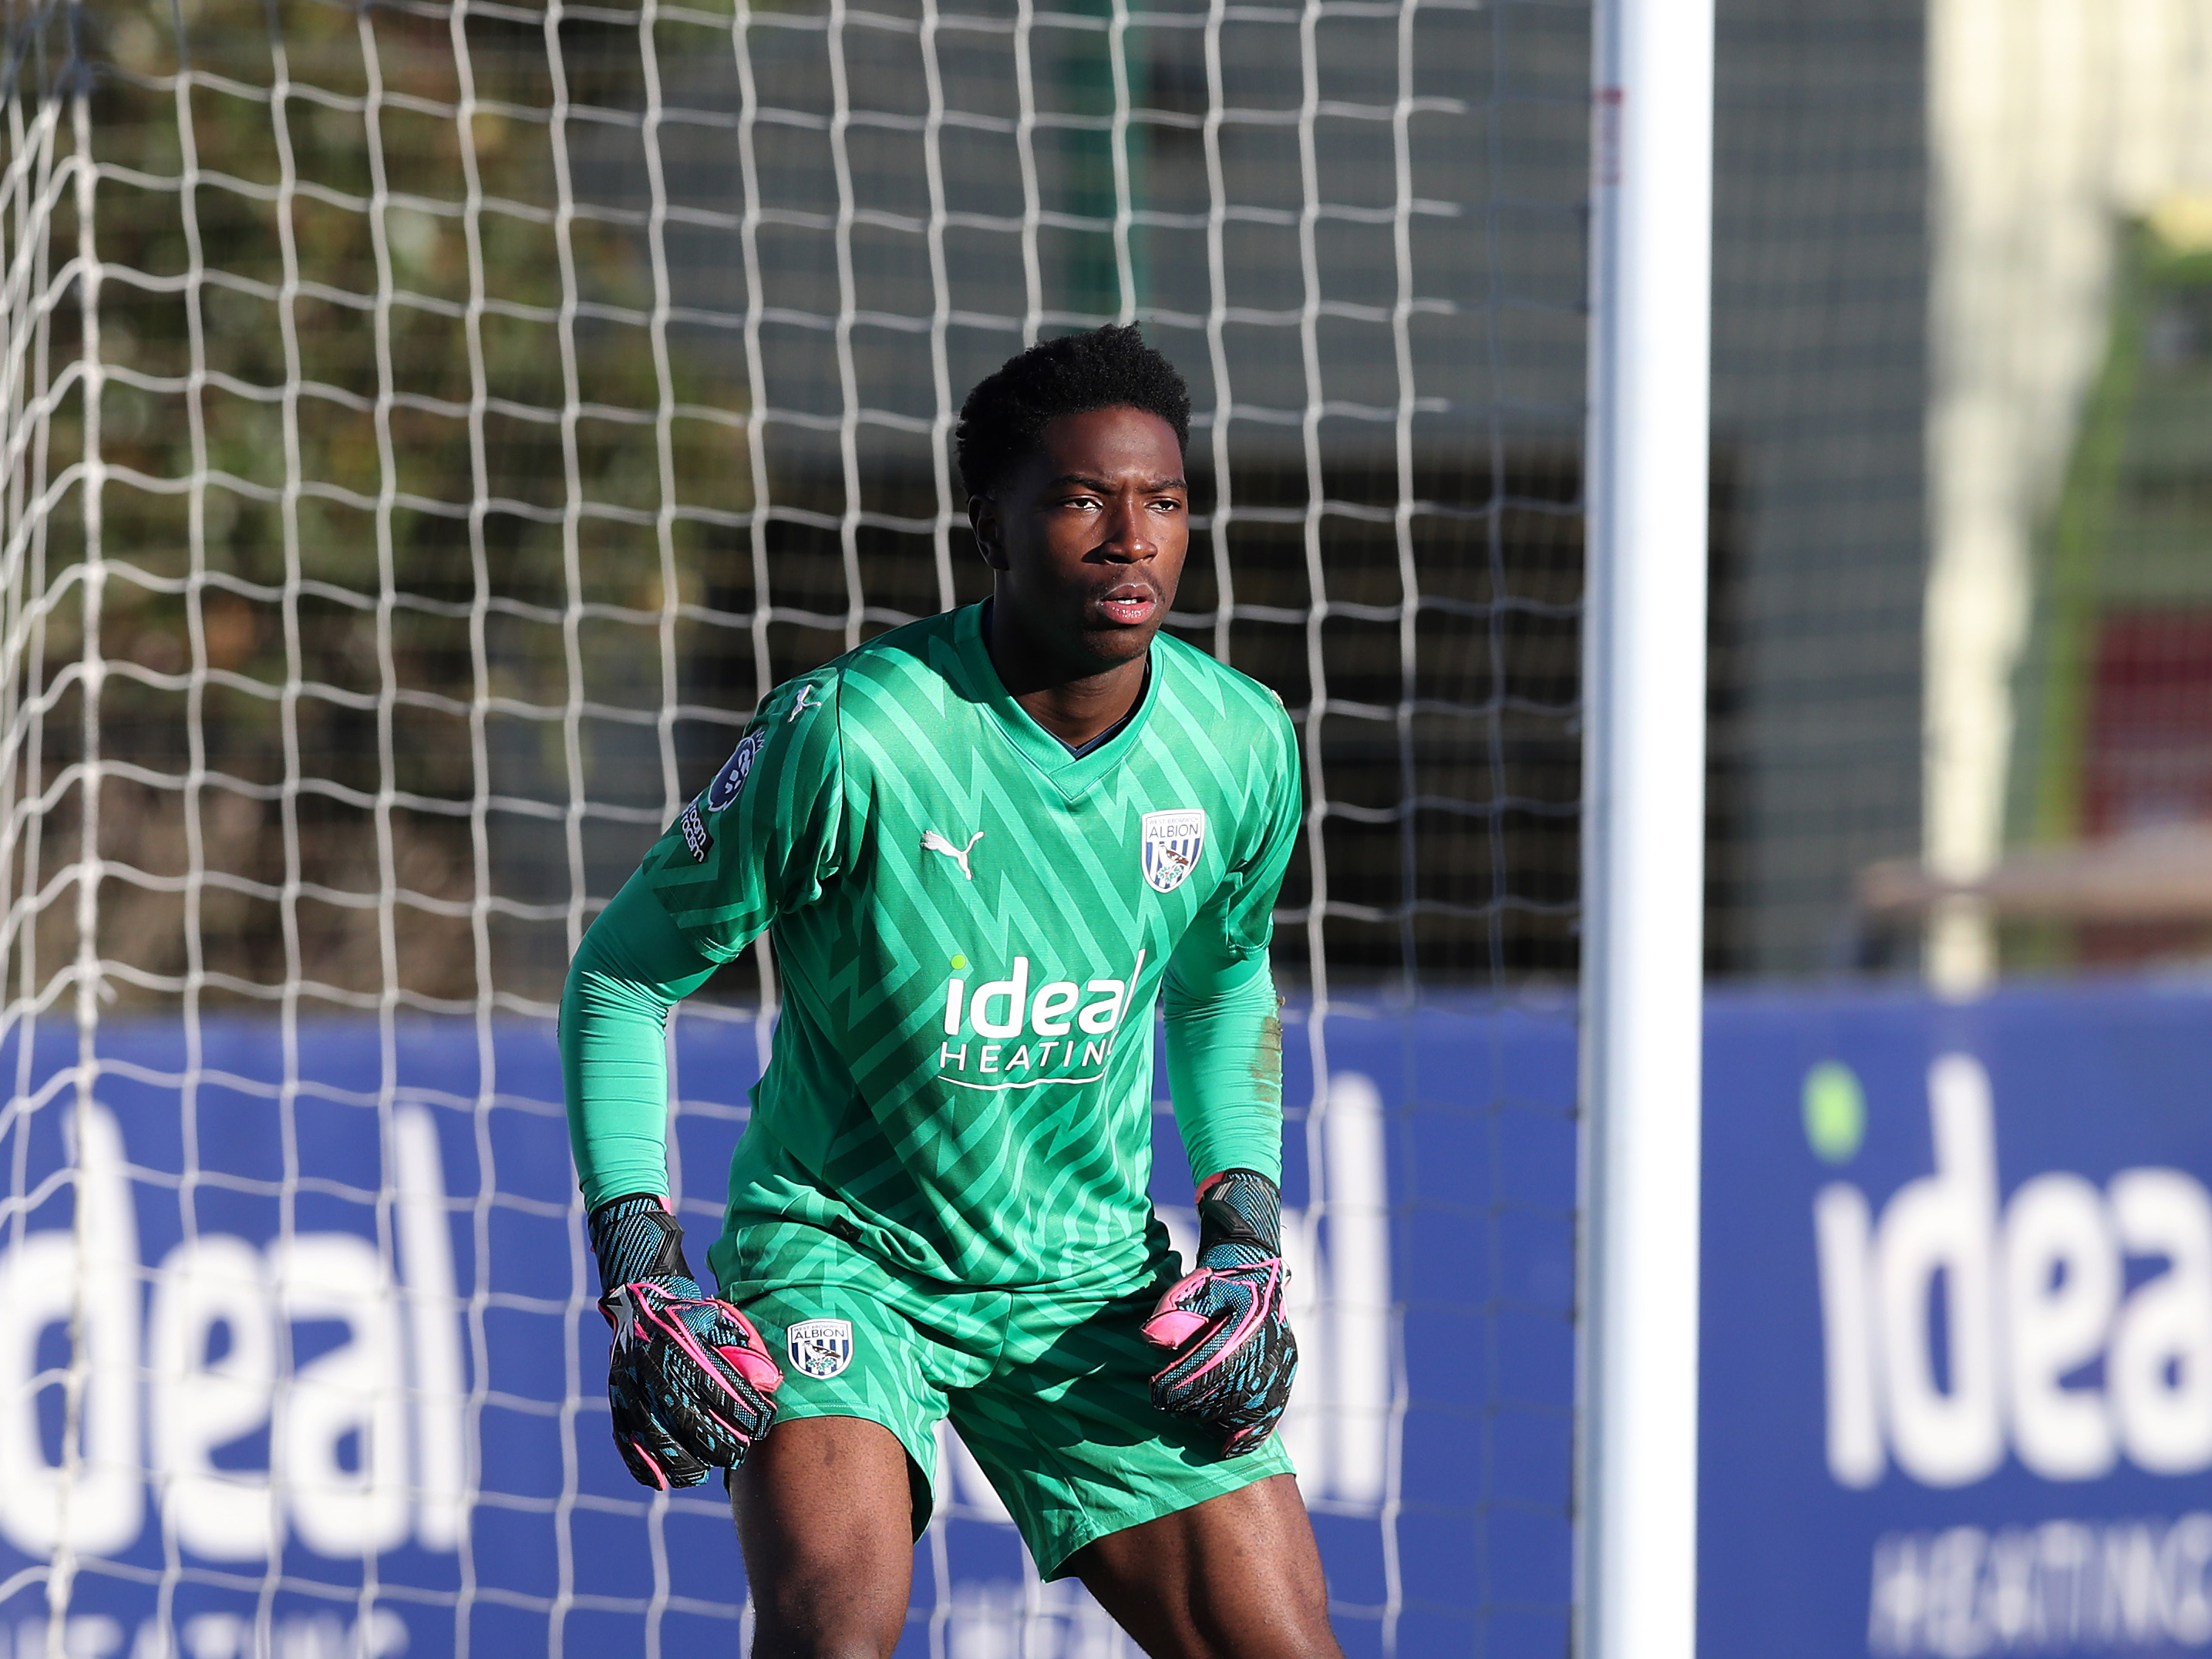 Ben Cisse in action for Albion's PL2 side wearing the green goalkeeper kit 